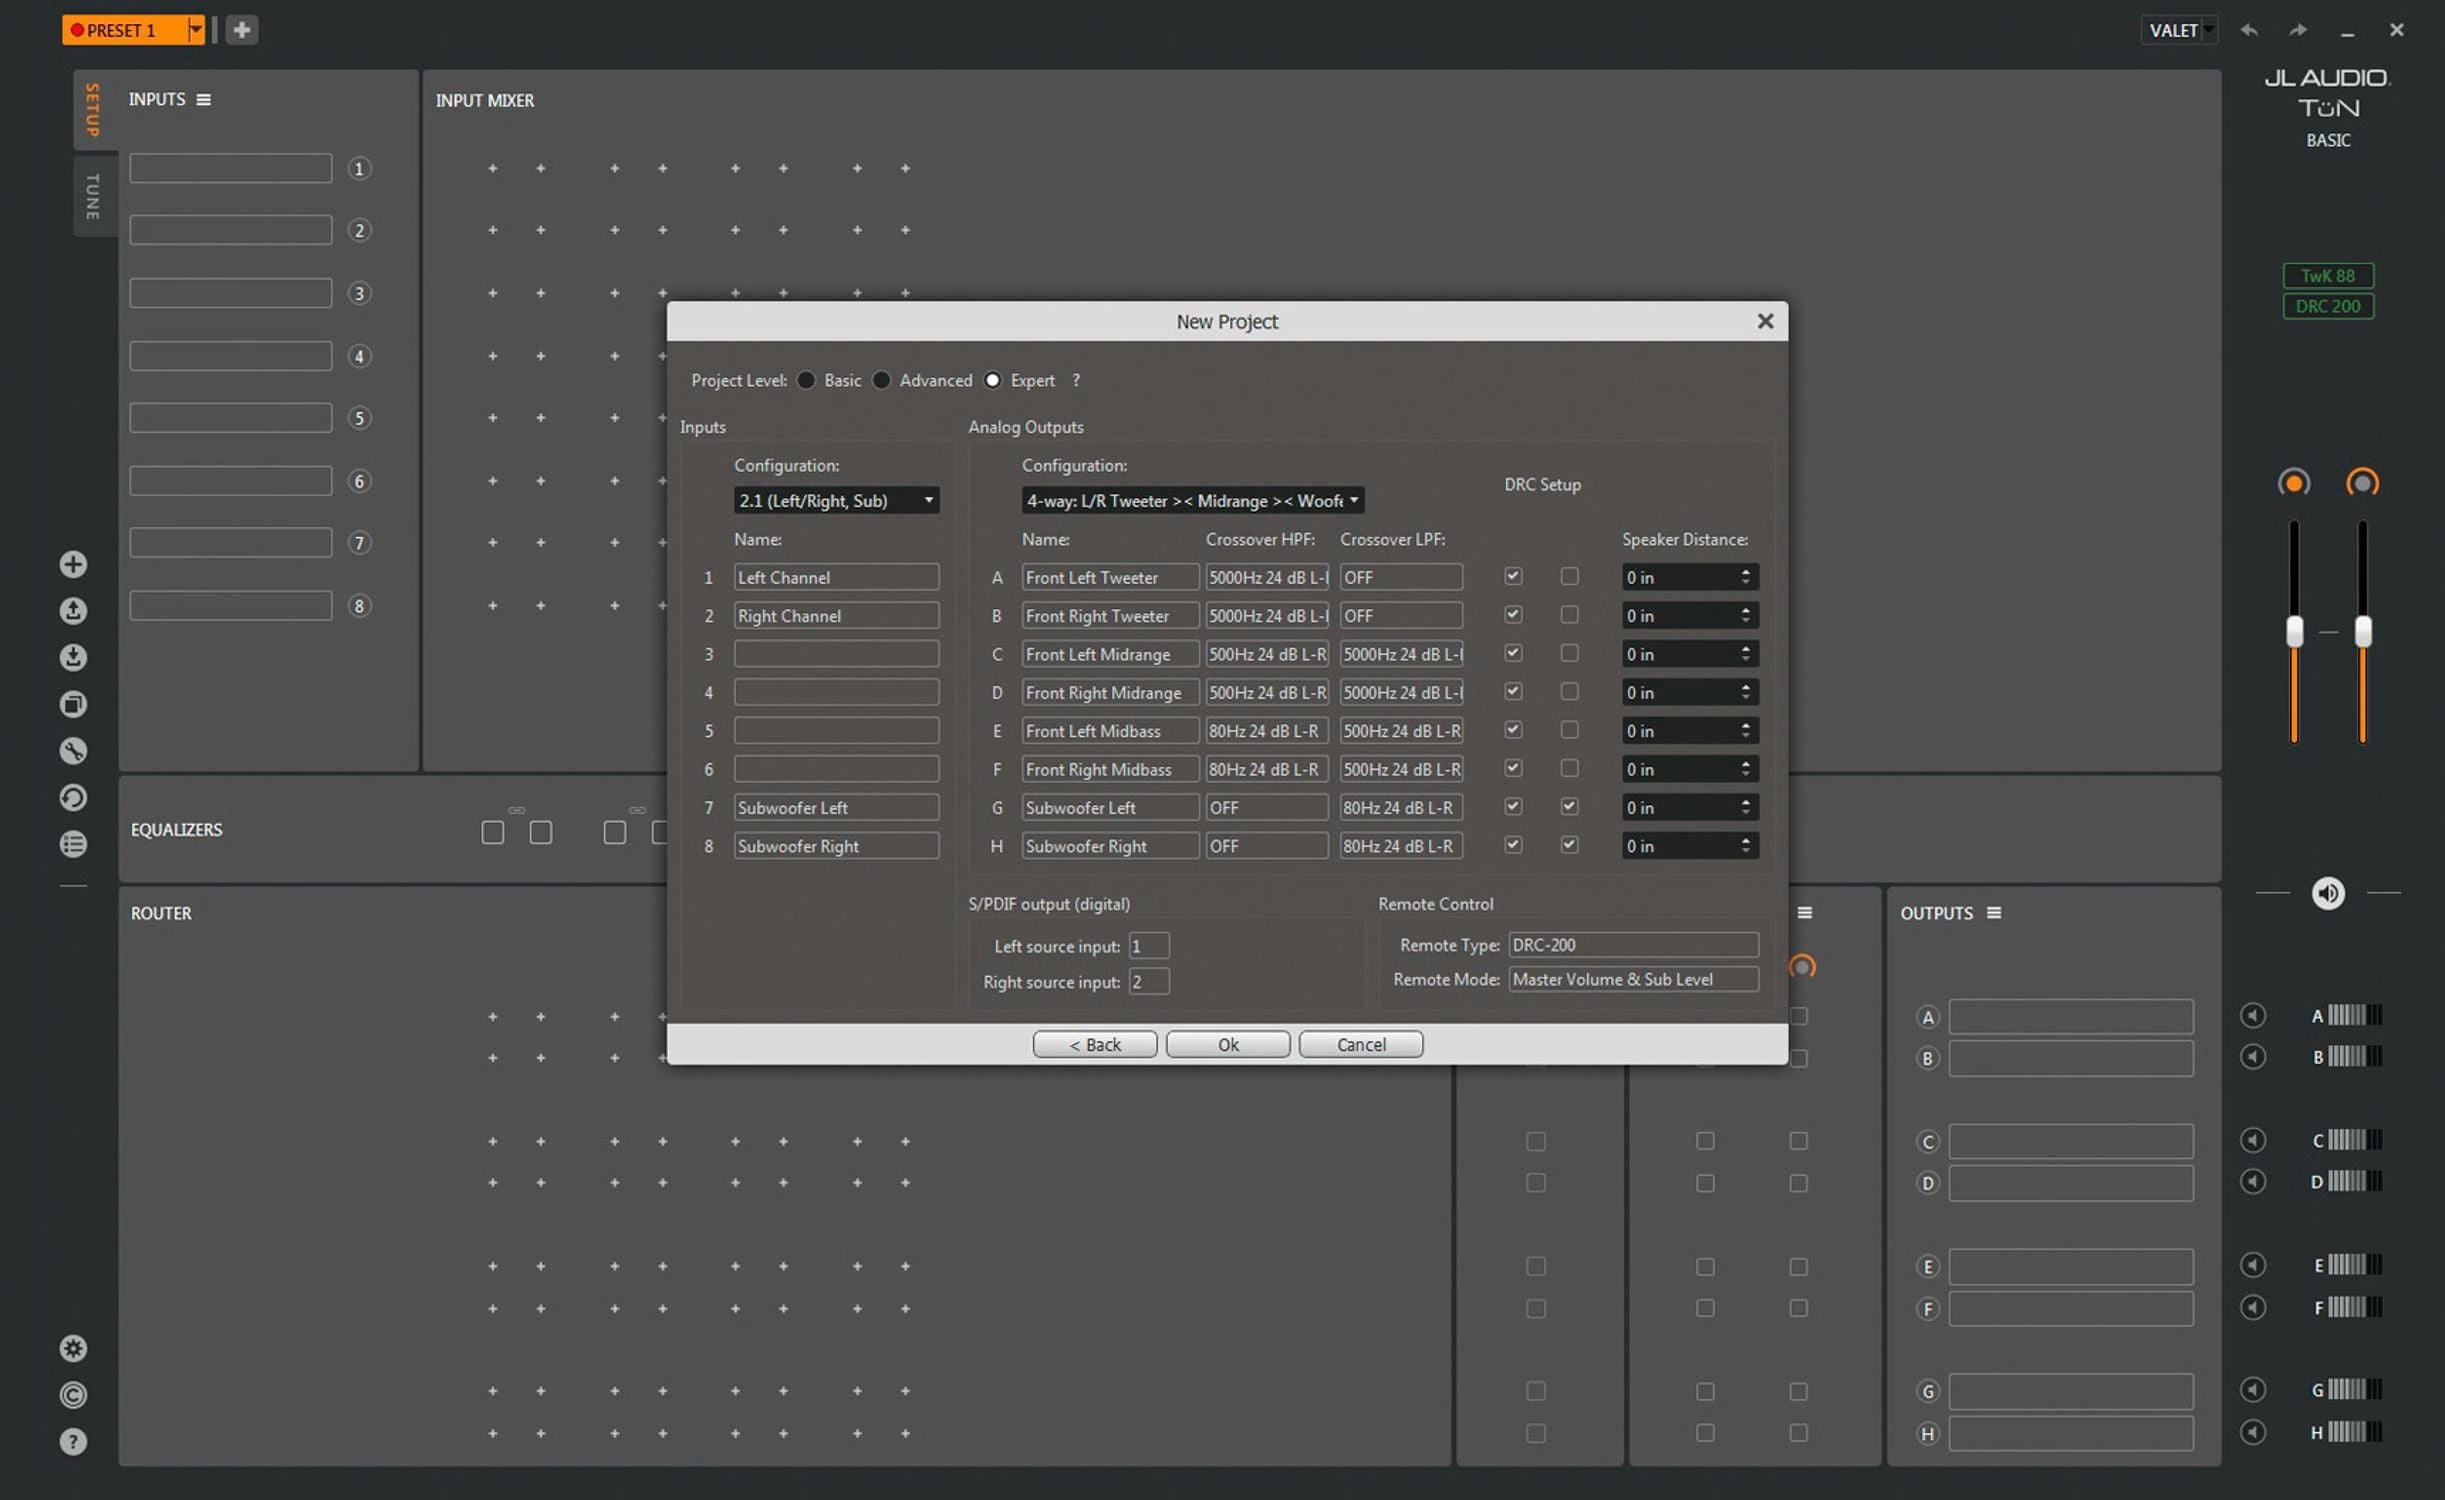 Screen Shot of the New Project Window in TüN Software